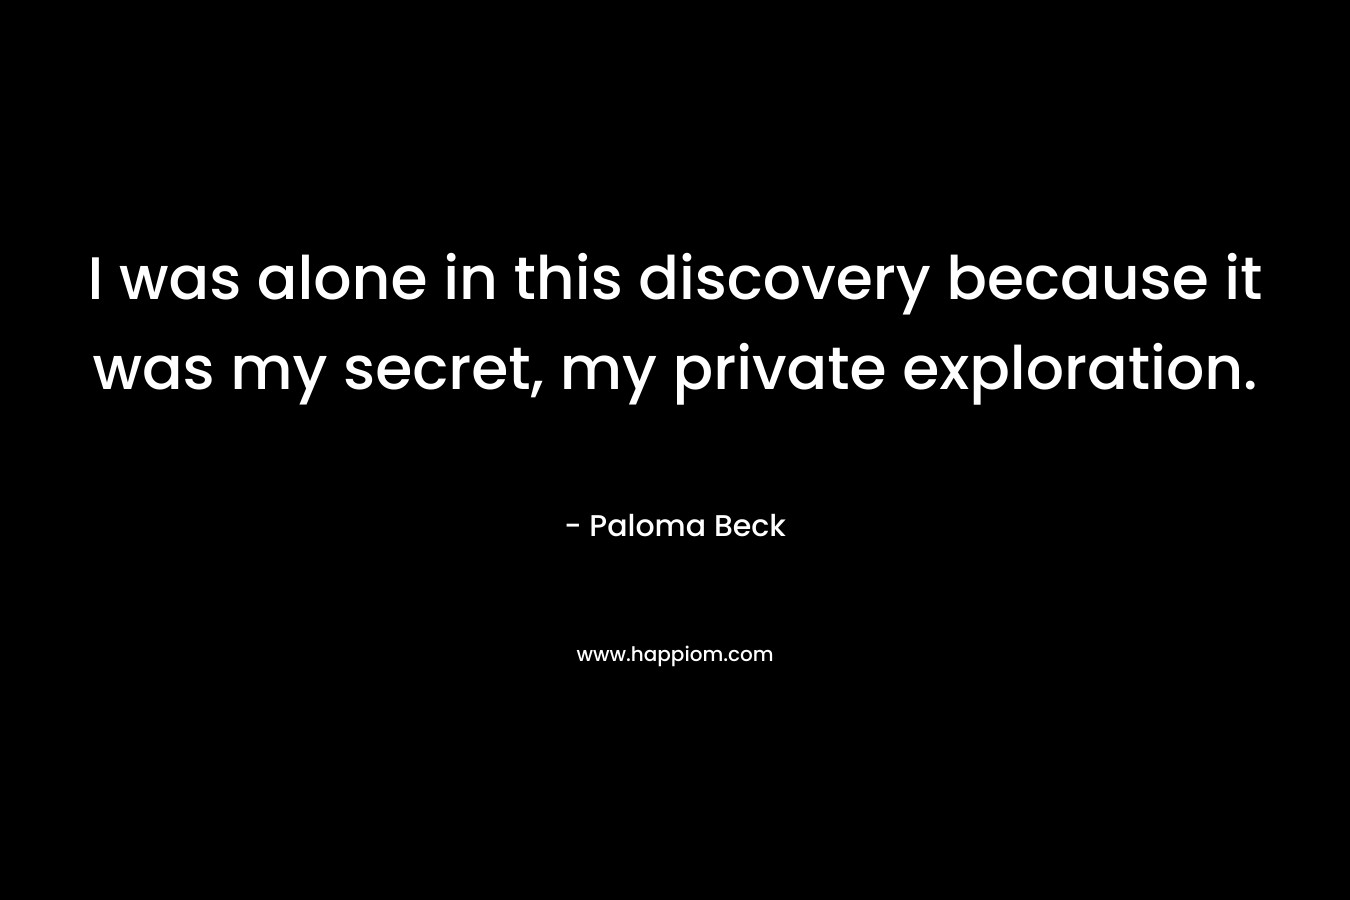 I was alone in this discovery because it was my secret, my private exploration.